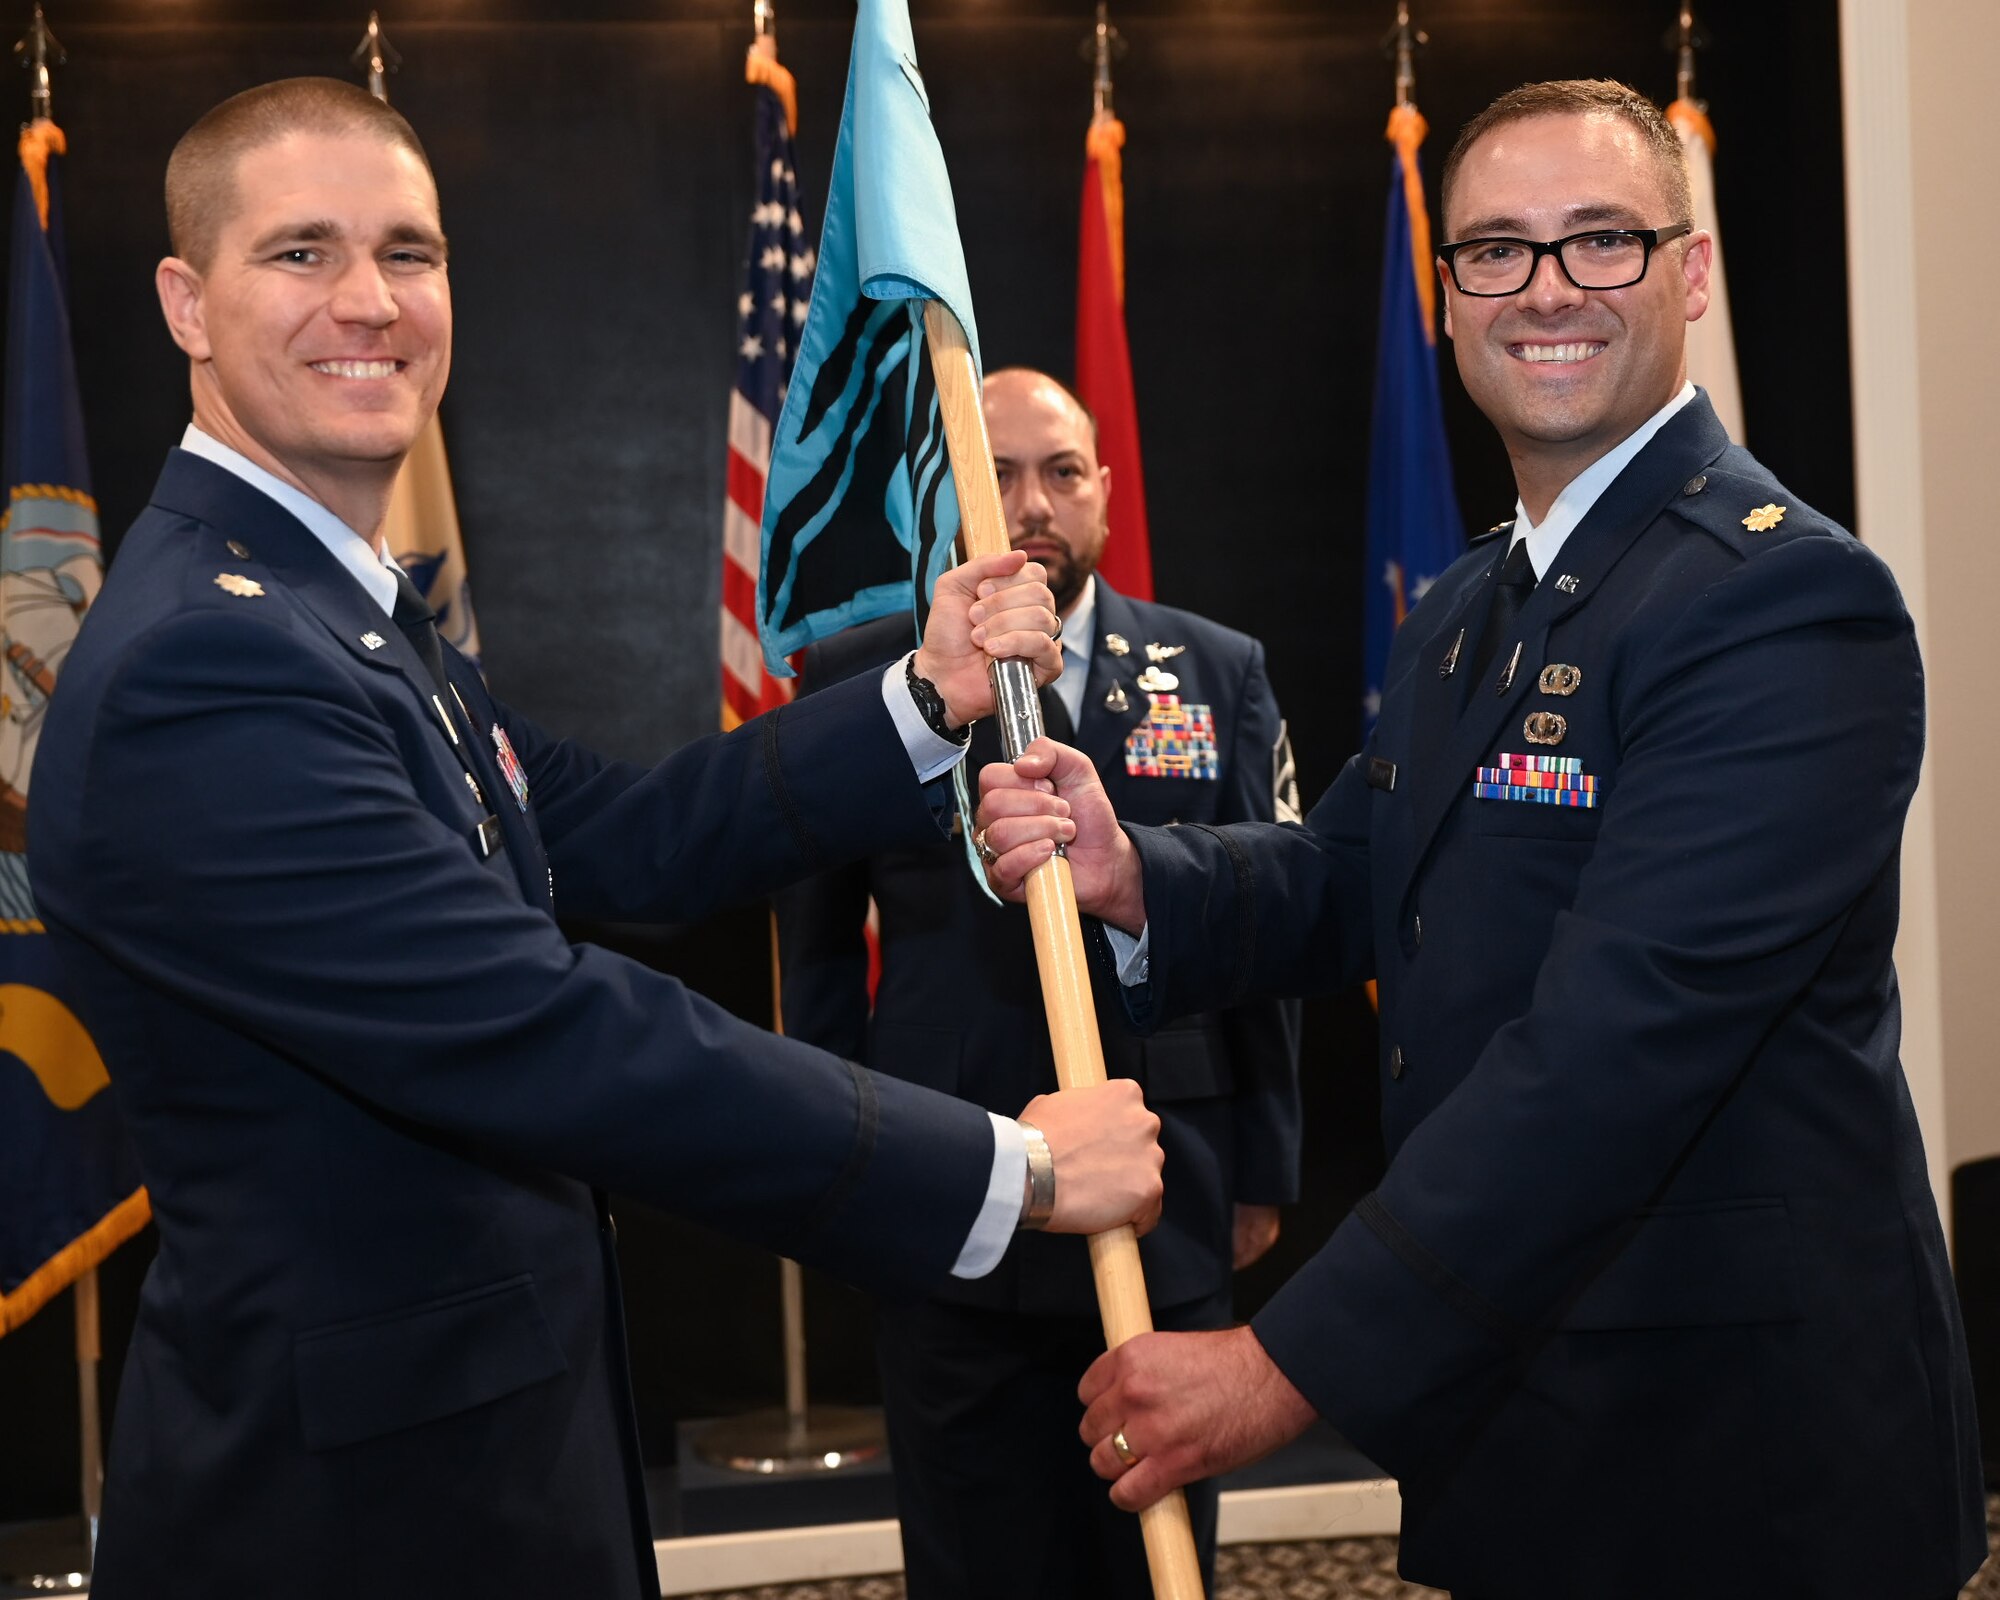 U.S. Space Force Lt. Col. Jonathan R. Arehart, 533rd Training Squadron commander, left, passes the 533rd TRS, Detachment 1 guidon to Maj. Benjamin Tillman, right, incoming commander, during the 533rd TRS, Detachment 1 Change of Command Ceremony at the Powell Event Center, Goodfellow Air Force Base, Texas, Aug. 29, 2023. This was the first-ever Change of Command Ceremony held for the detachment. (U.S. Air Force photo by Airman 1st Class Evelyn J. D’Errico)